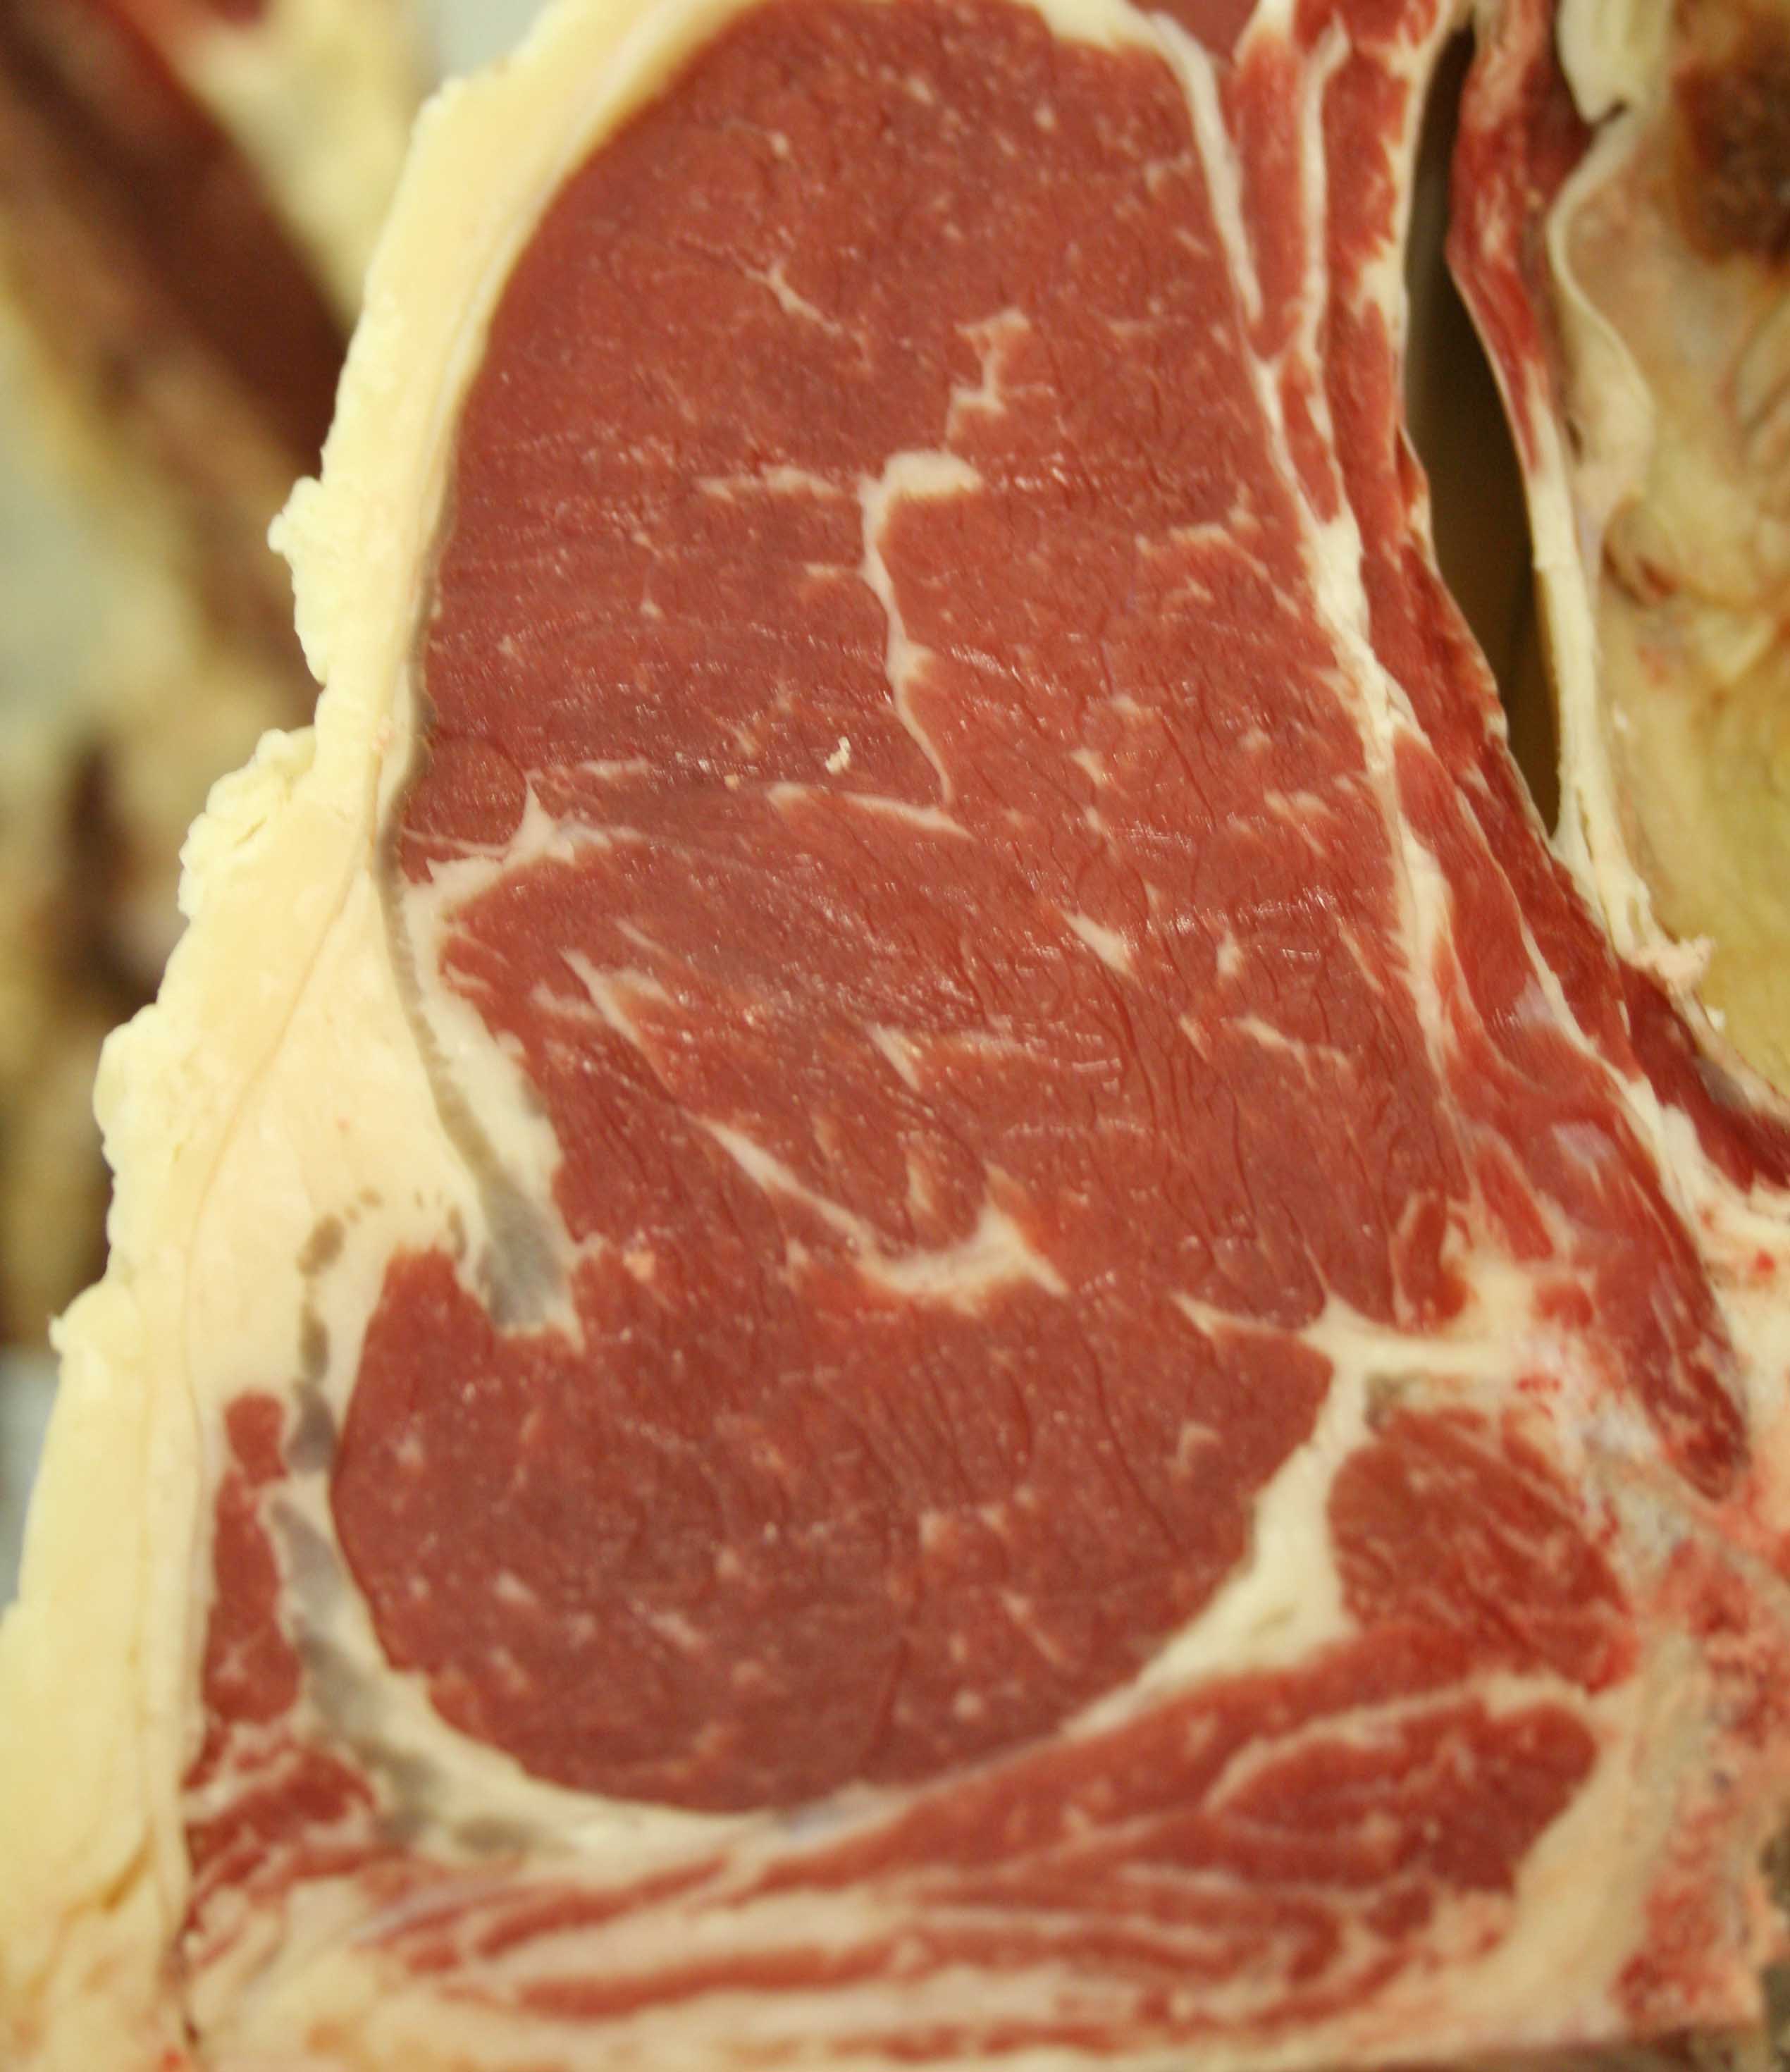 A well-marbled rib-eye steak taken from a grass-finished steer raised at UGA's Eatonton Beef Research Unit as part of a 2014 study on grass-finished beef forages.